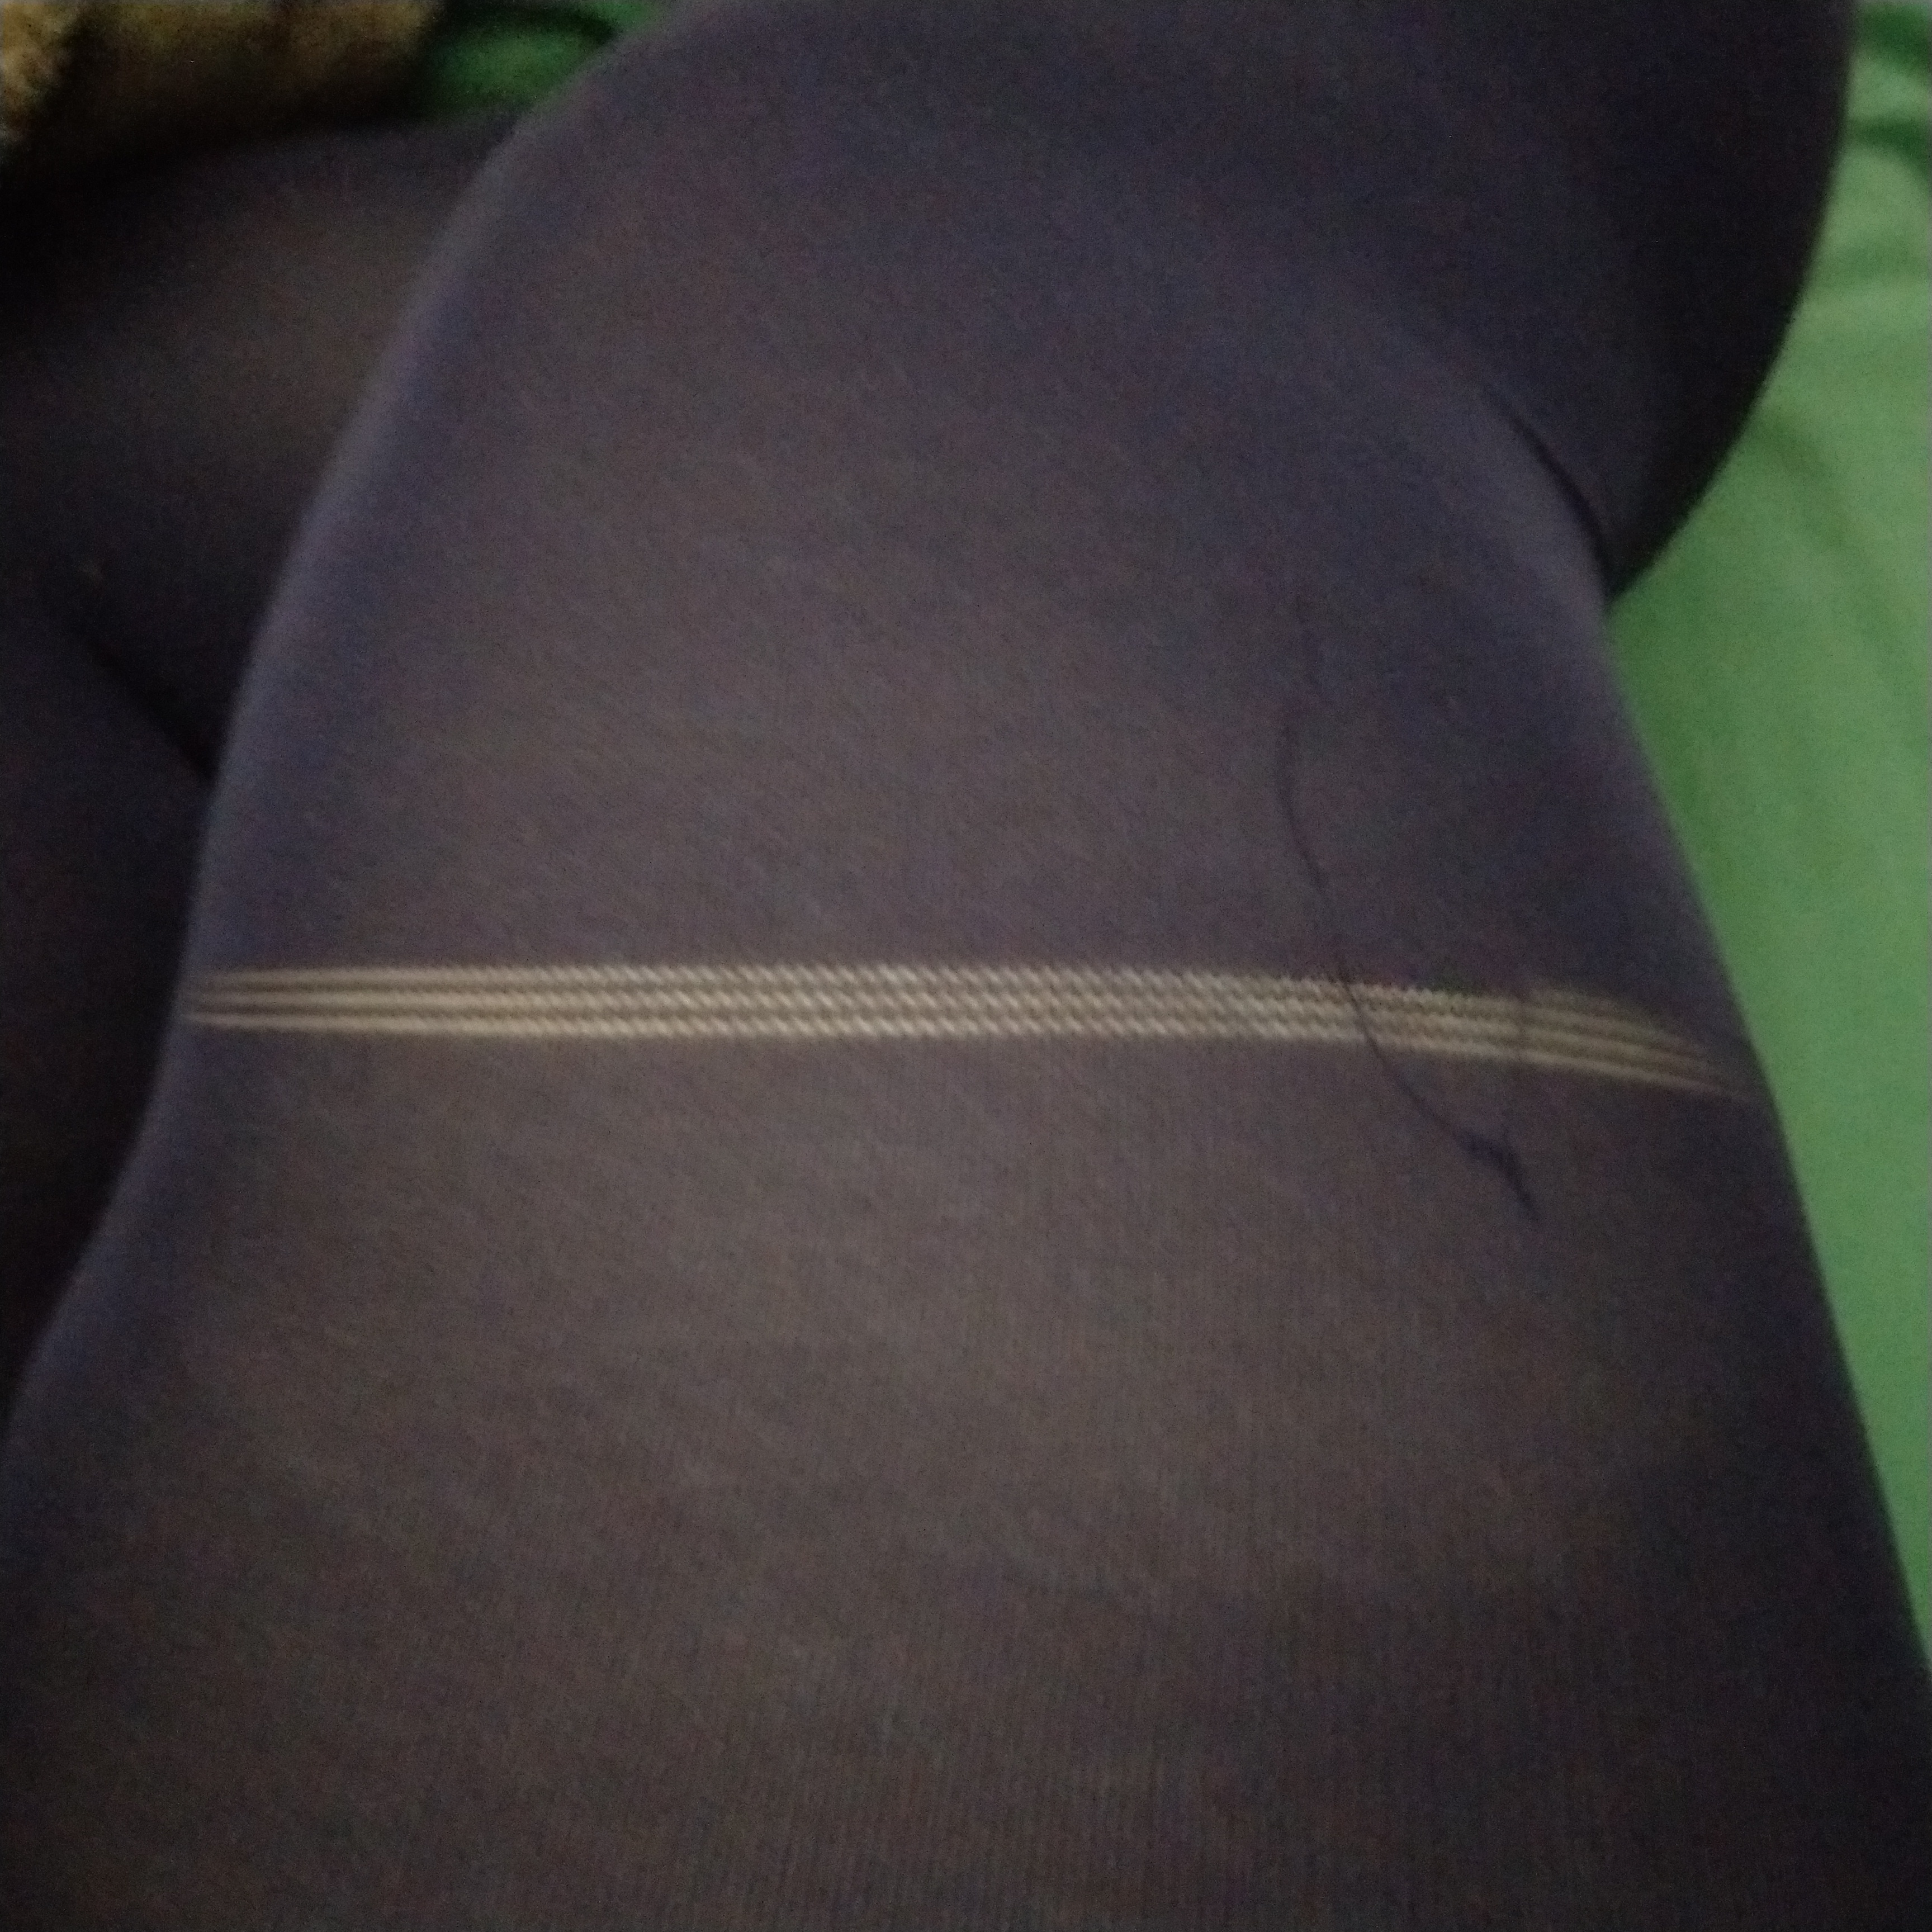 Snag Tights Reviews - Read Reviews on Snagtights.com Before You